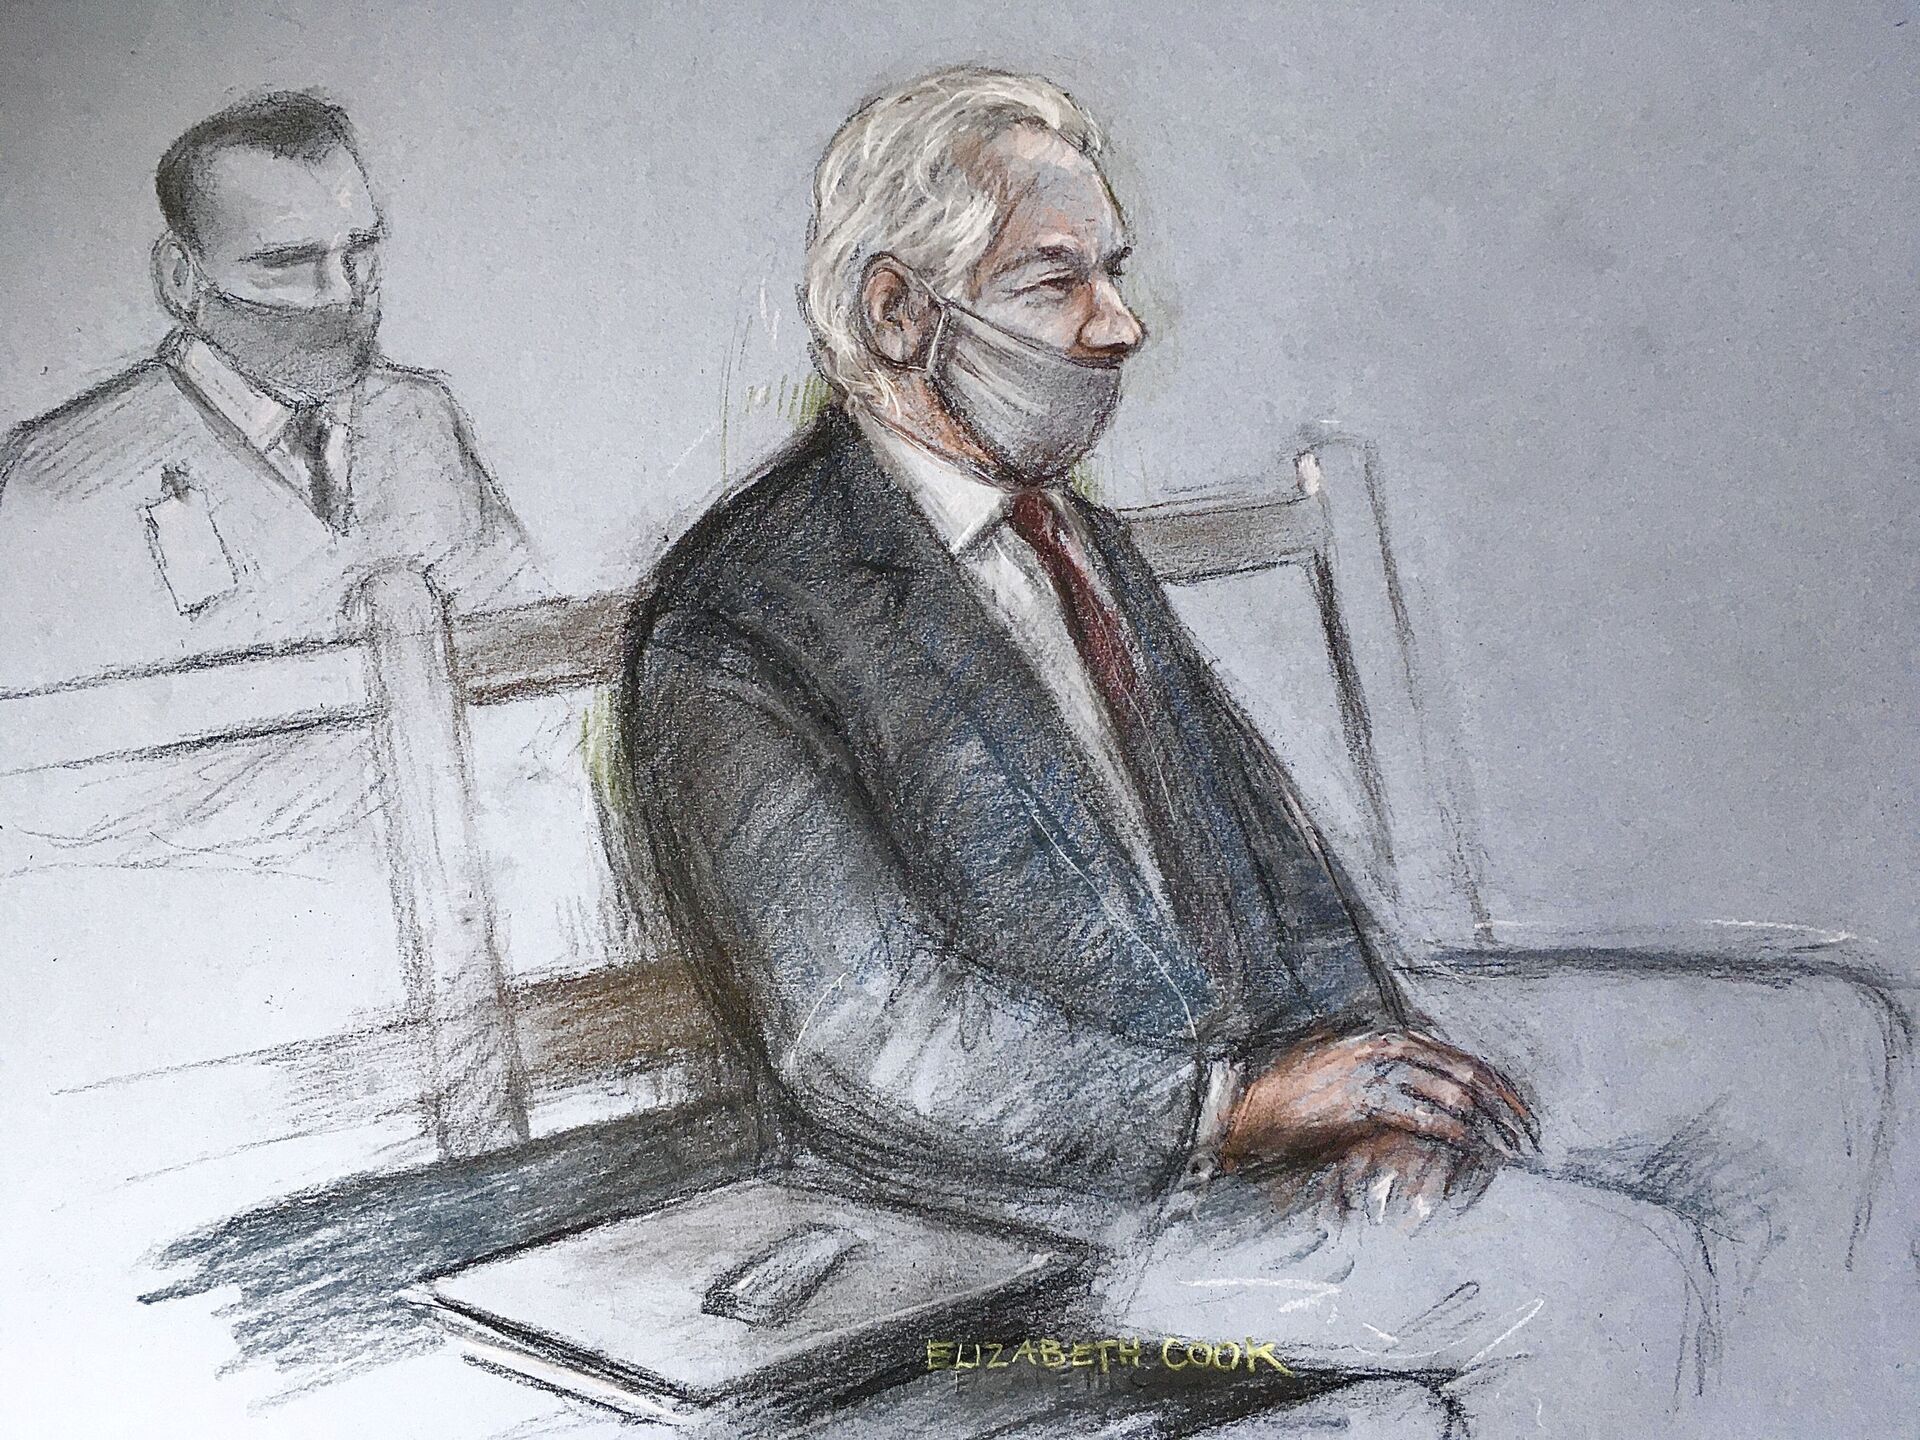 This is a court artist sketch by Elizabeth Cook of Julian Assange appearing at the Old Bailey in London for the ruling in his extradition case, in London, Monday, Jan. 4, 2021. A British judge has rejected the United States’ request to extradite WikiLeaks founder Julian Assange to face espionage charges, saying it would be “oppressive” because of his mental health. District Judge Vanessa Baraitser said Assange was likely to kill himself if sent to the U.S. The U.S. government said it would appeal the decision.  (Elizabeth Cook/PA via AP) - Sputnik International, 1920, 21.04.2022